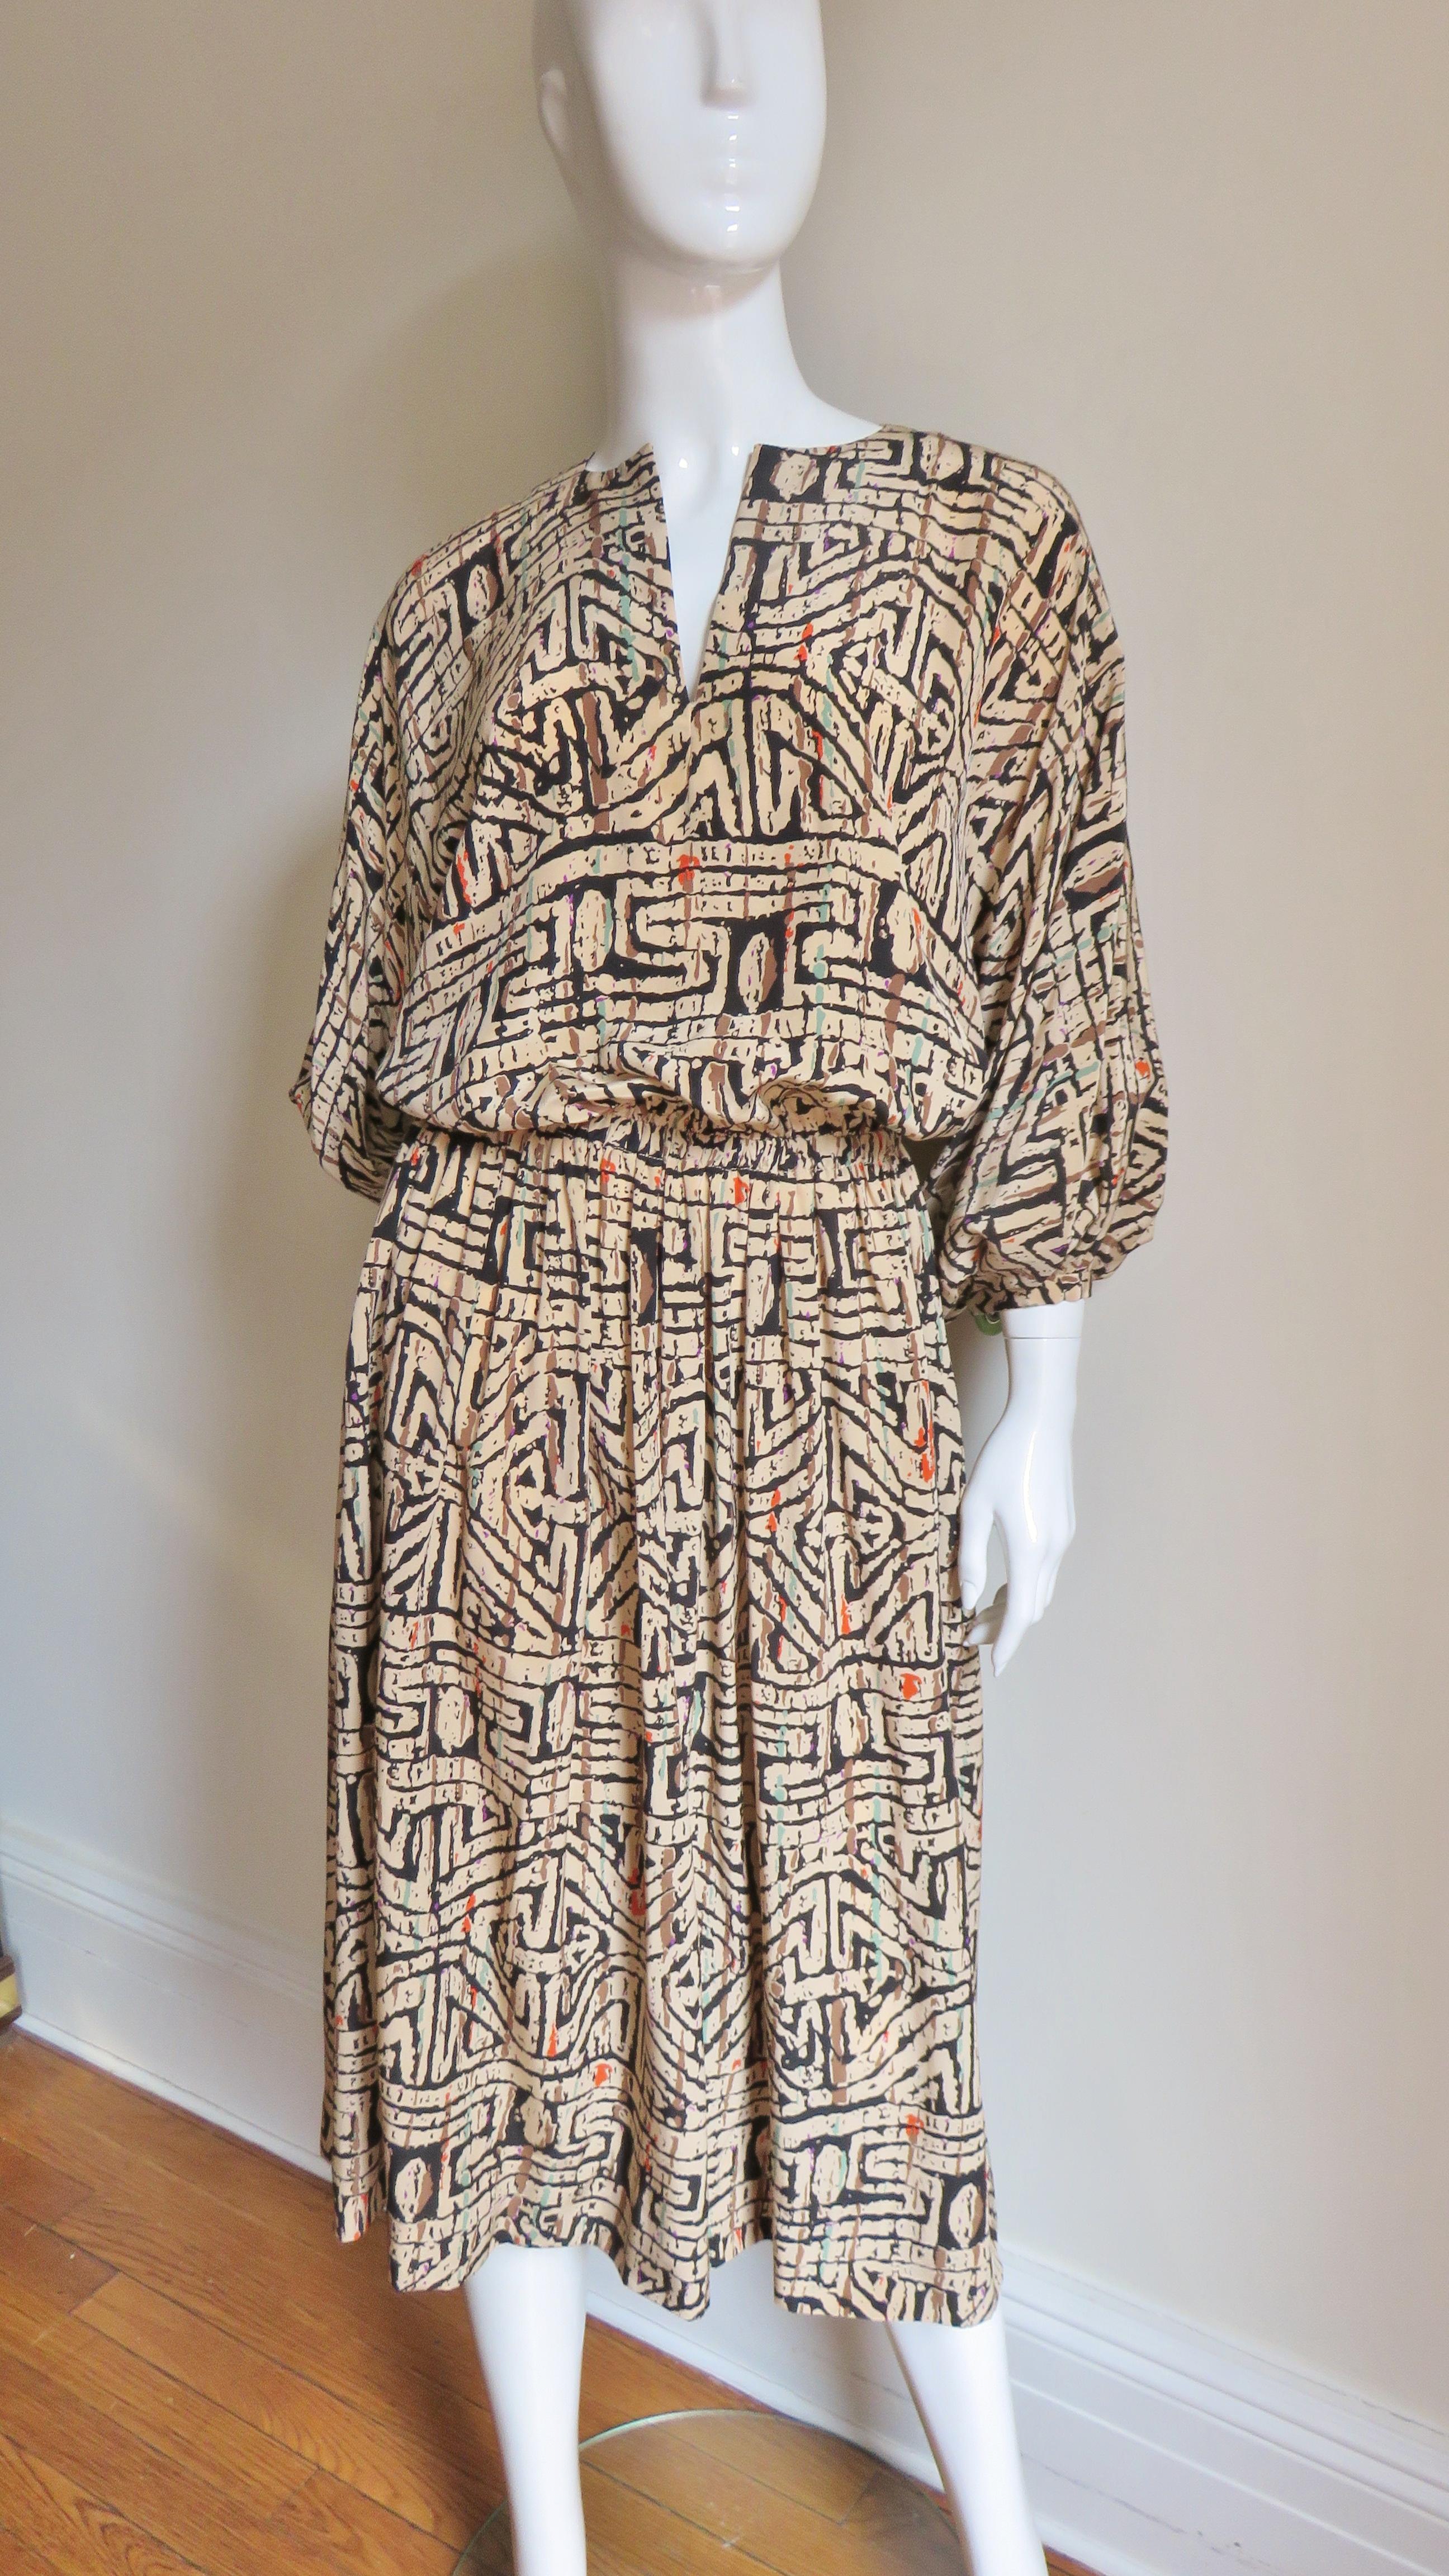 A fabulous silk tribal print dress in black, brown, orange and blue on a beige background by Halston.  It has a slit crew neckline, blouson drape bodice with stretch at the waist and 3/4 length balloon dolman sleeves a snap on the cuffs.  The skirt